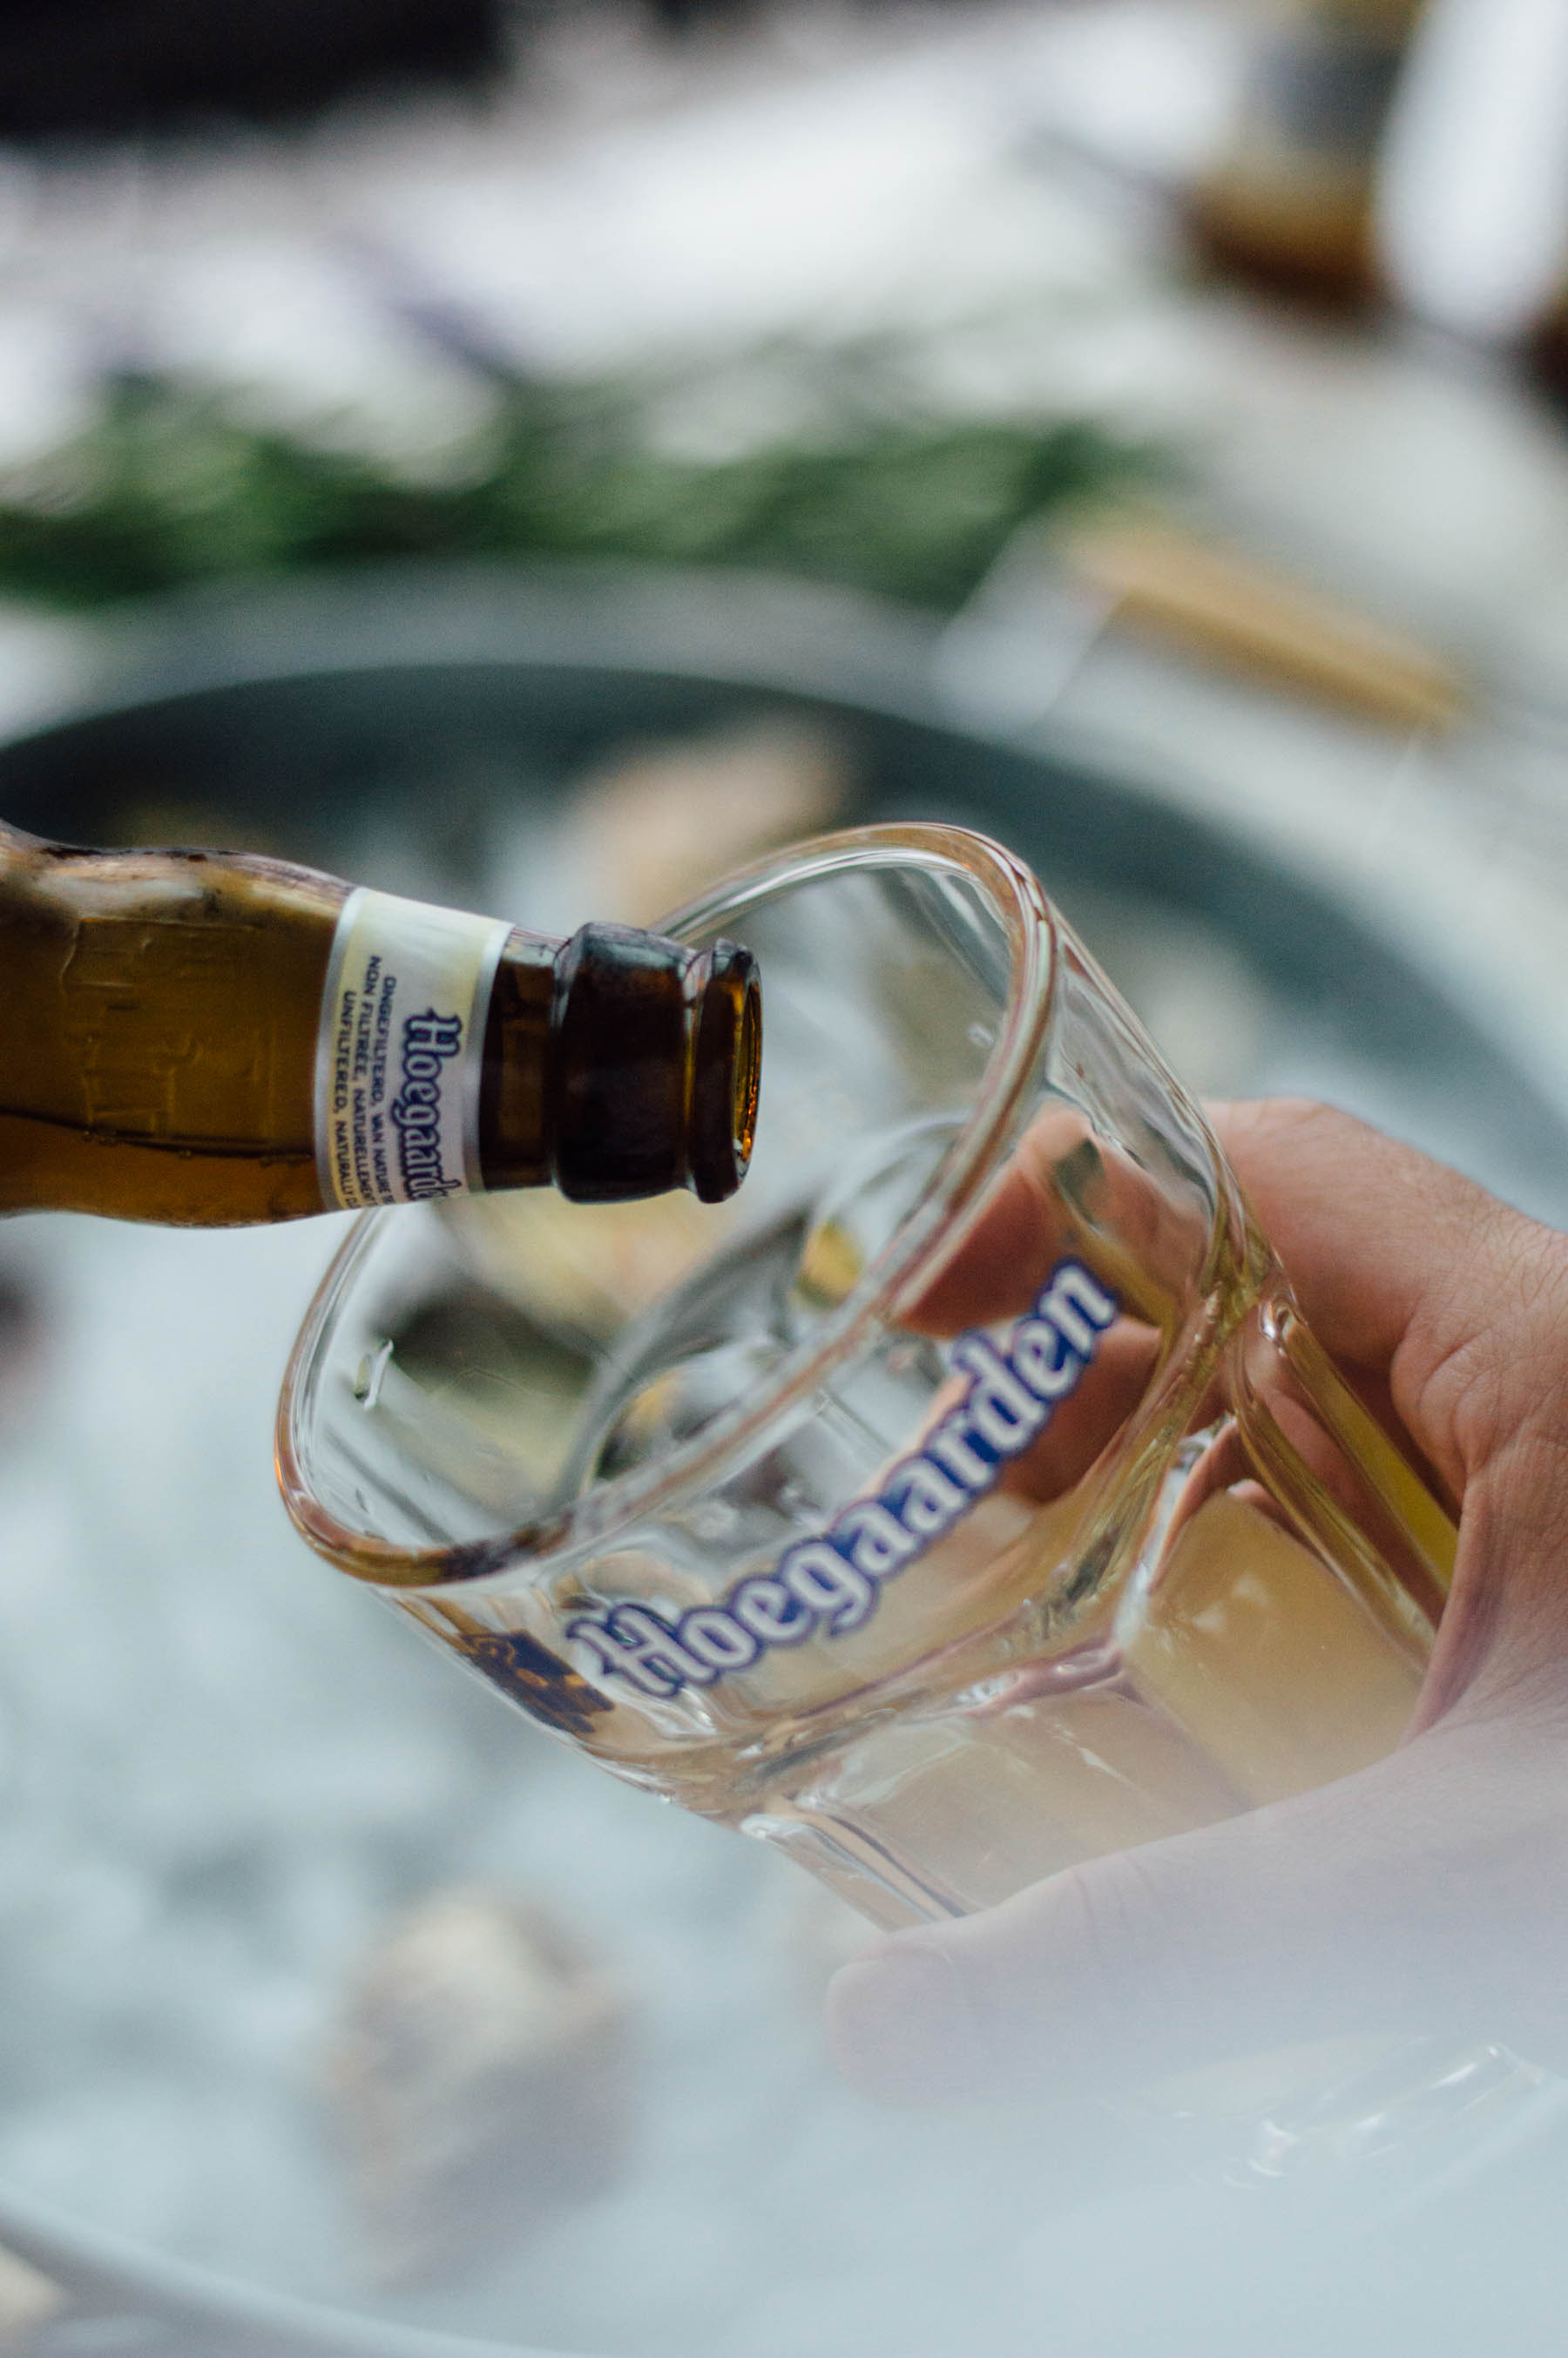 It's Who-Gaar-Den! Loved pairing this sweet Hoegaarden beer with 3 mignonette recipes for a little indoor oyster fest | bygabriella.co